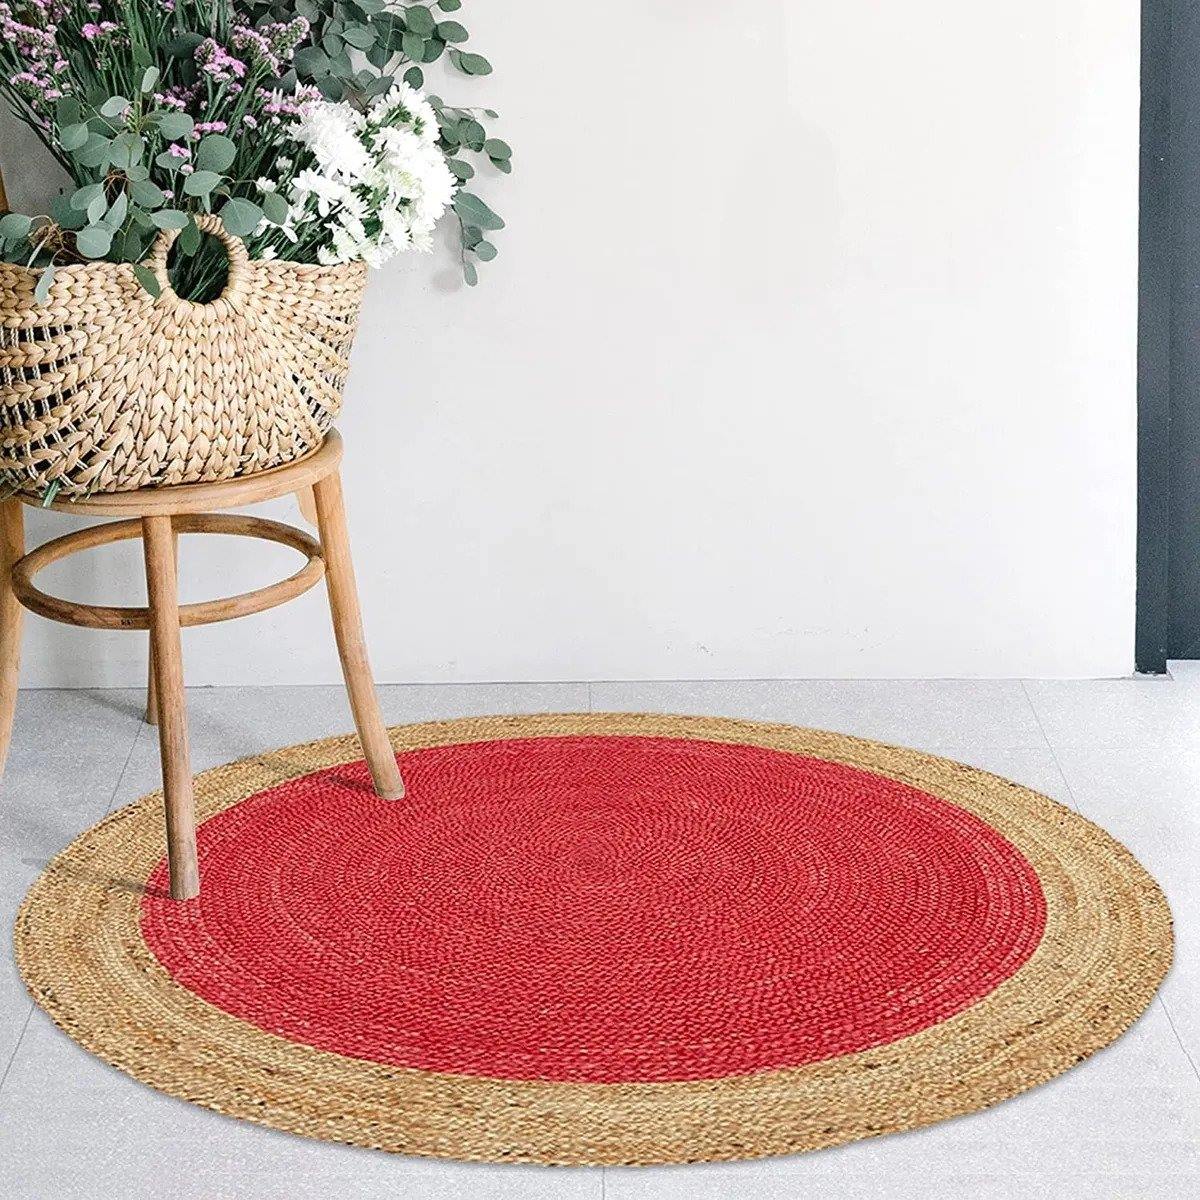 How To Wash Braided Rugs | Storables